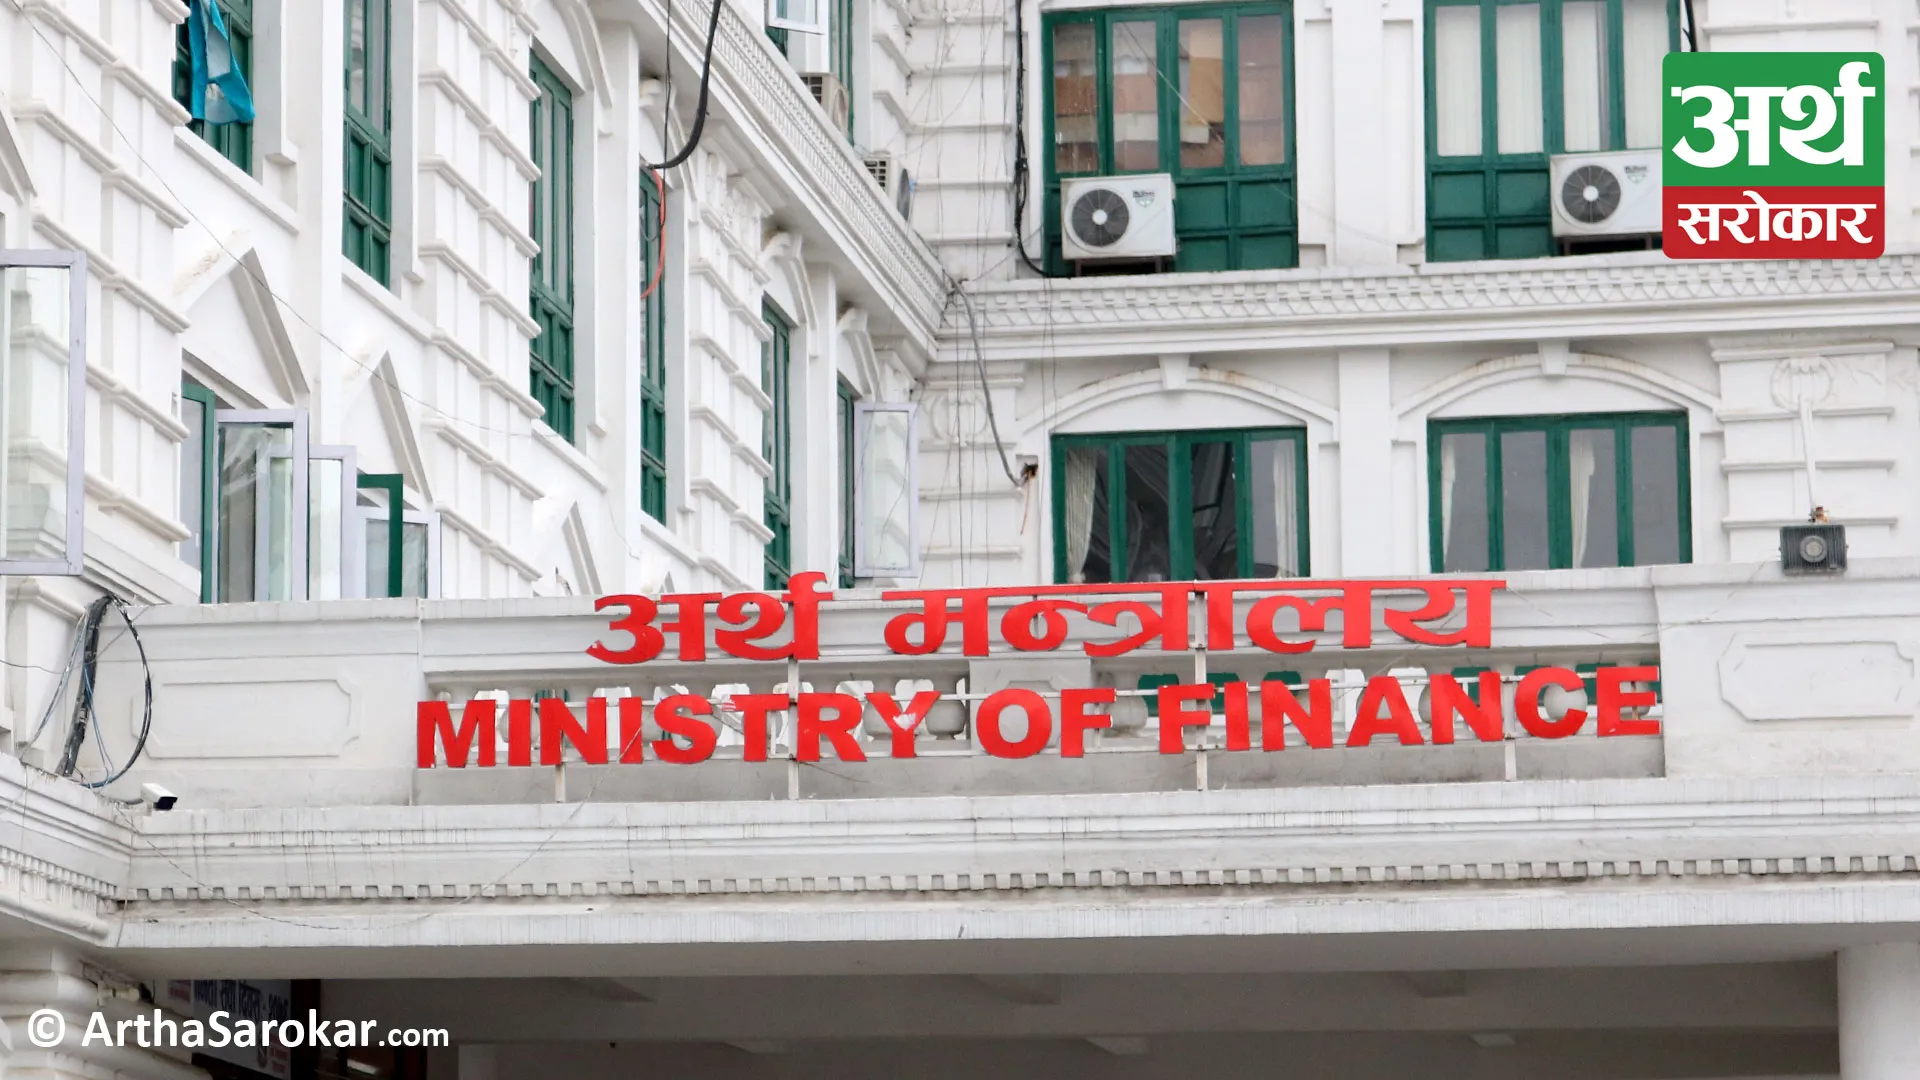 Ministry of Finance Directs Banks to Halt Counting Local-Level Deposits